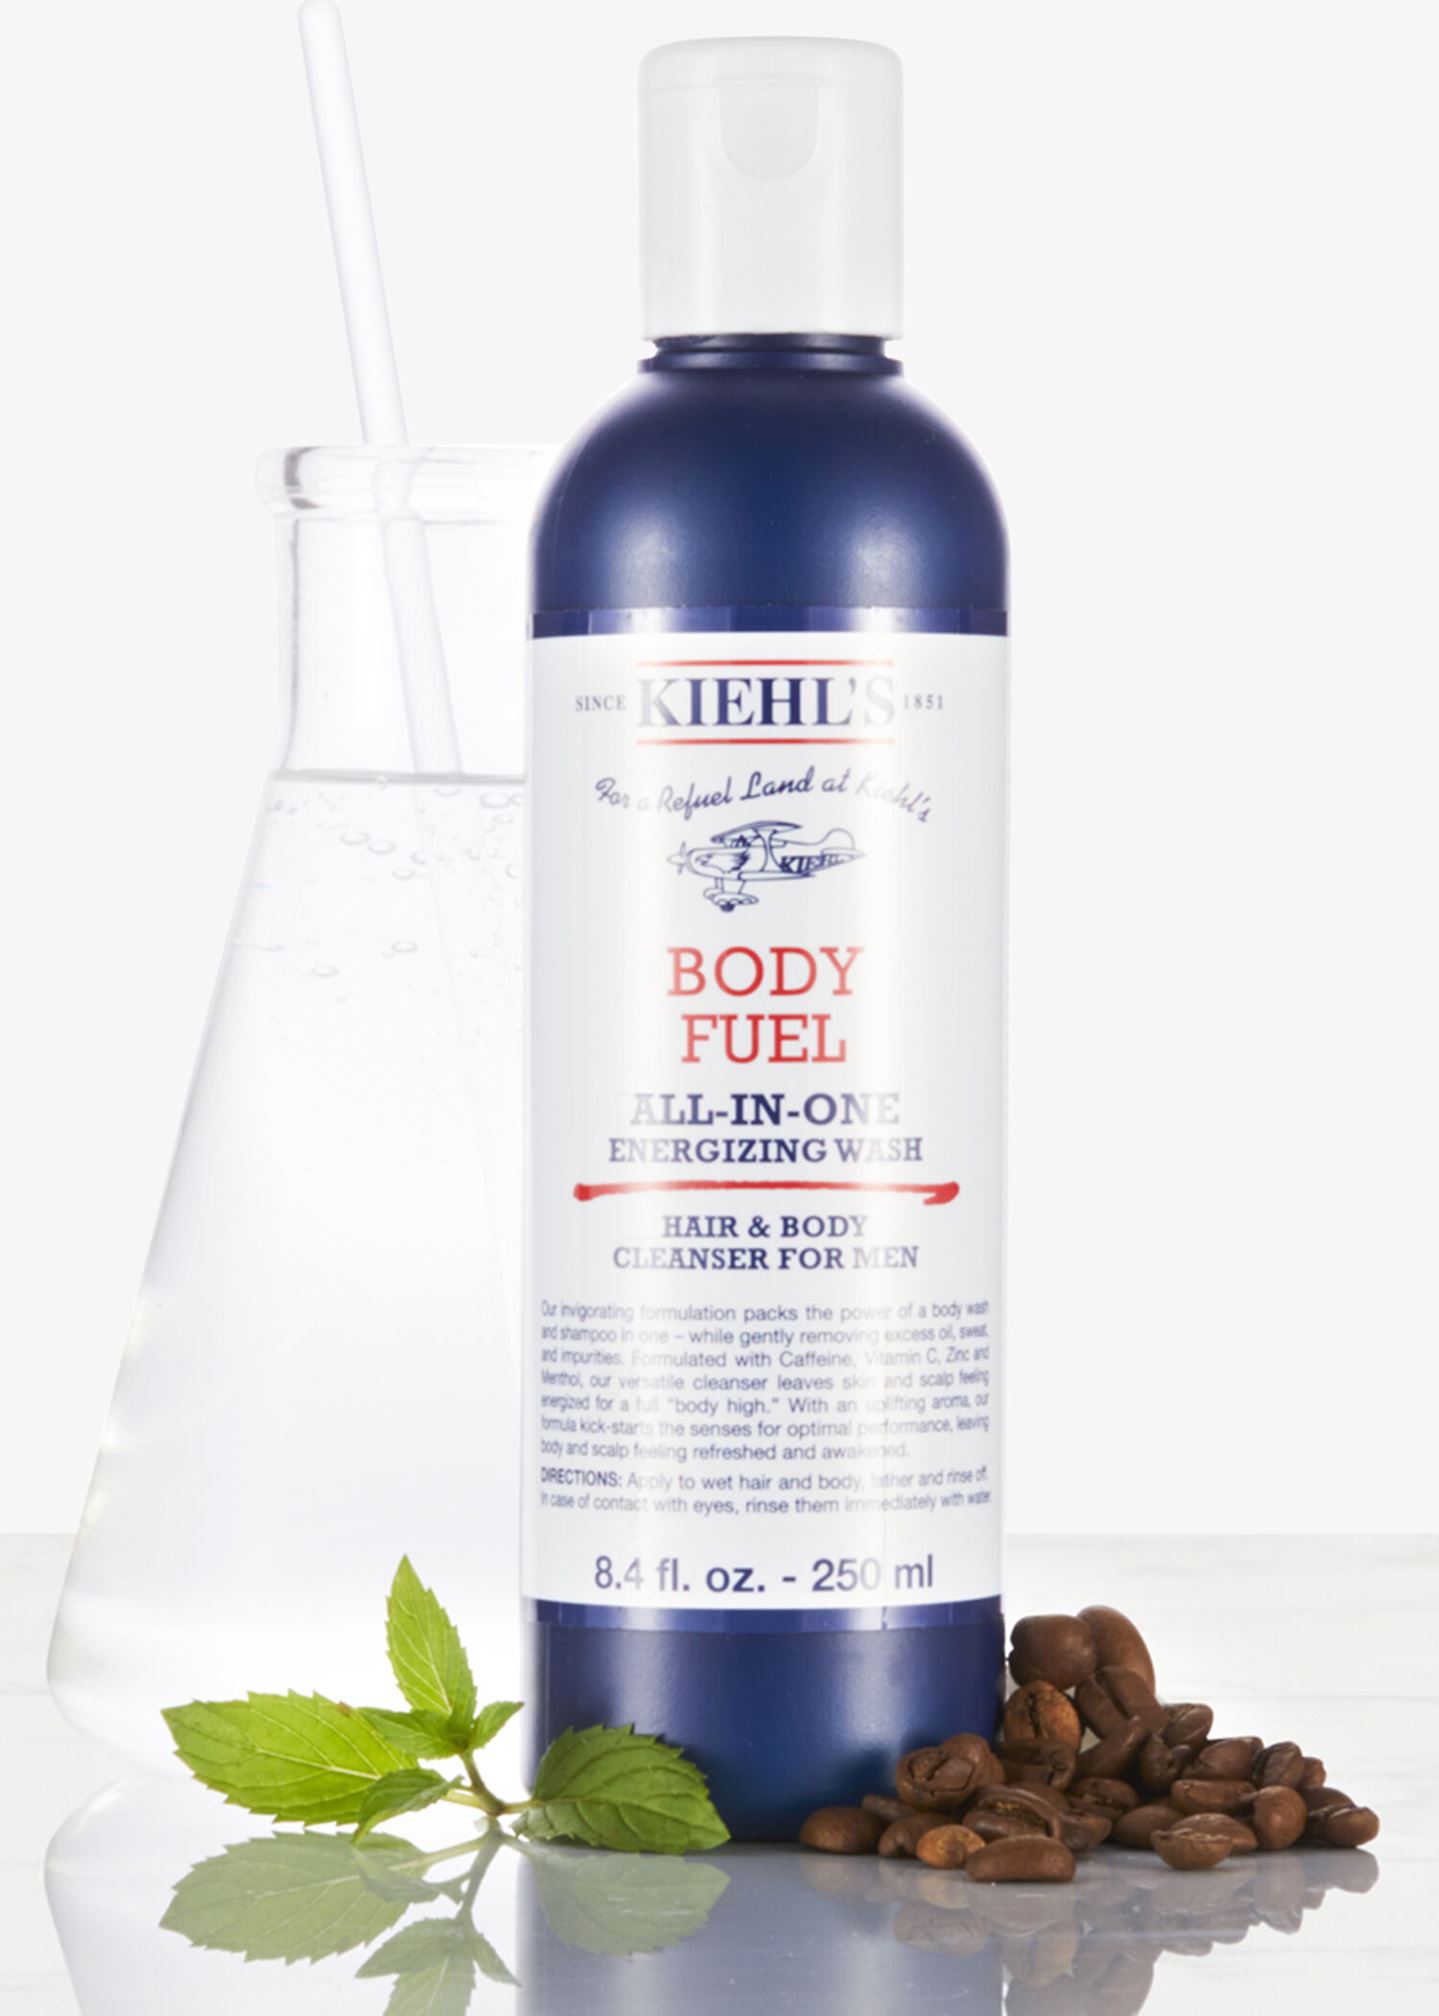 Kiehls «All in one energizing wash»